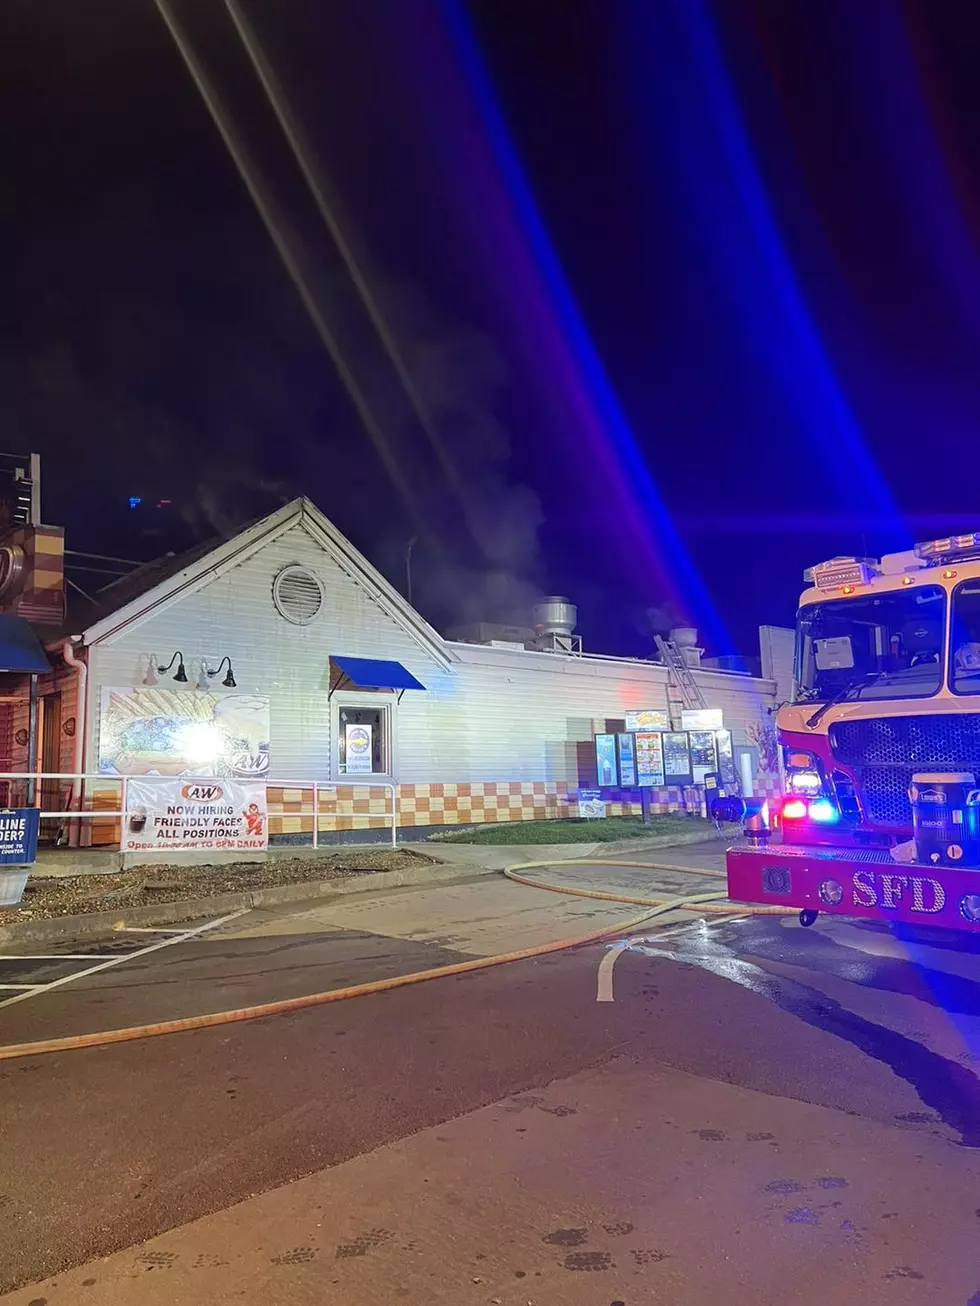 SFD Responds To Fire at Long John Silver’s in Sedalia